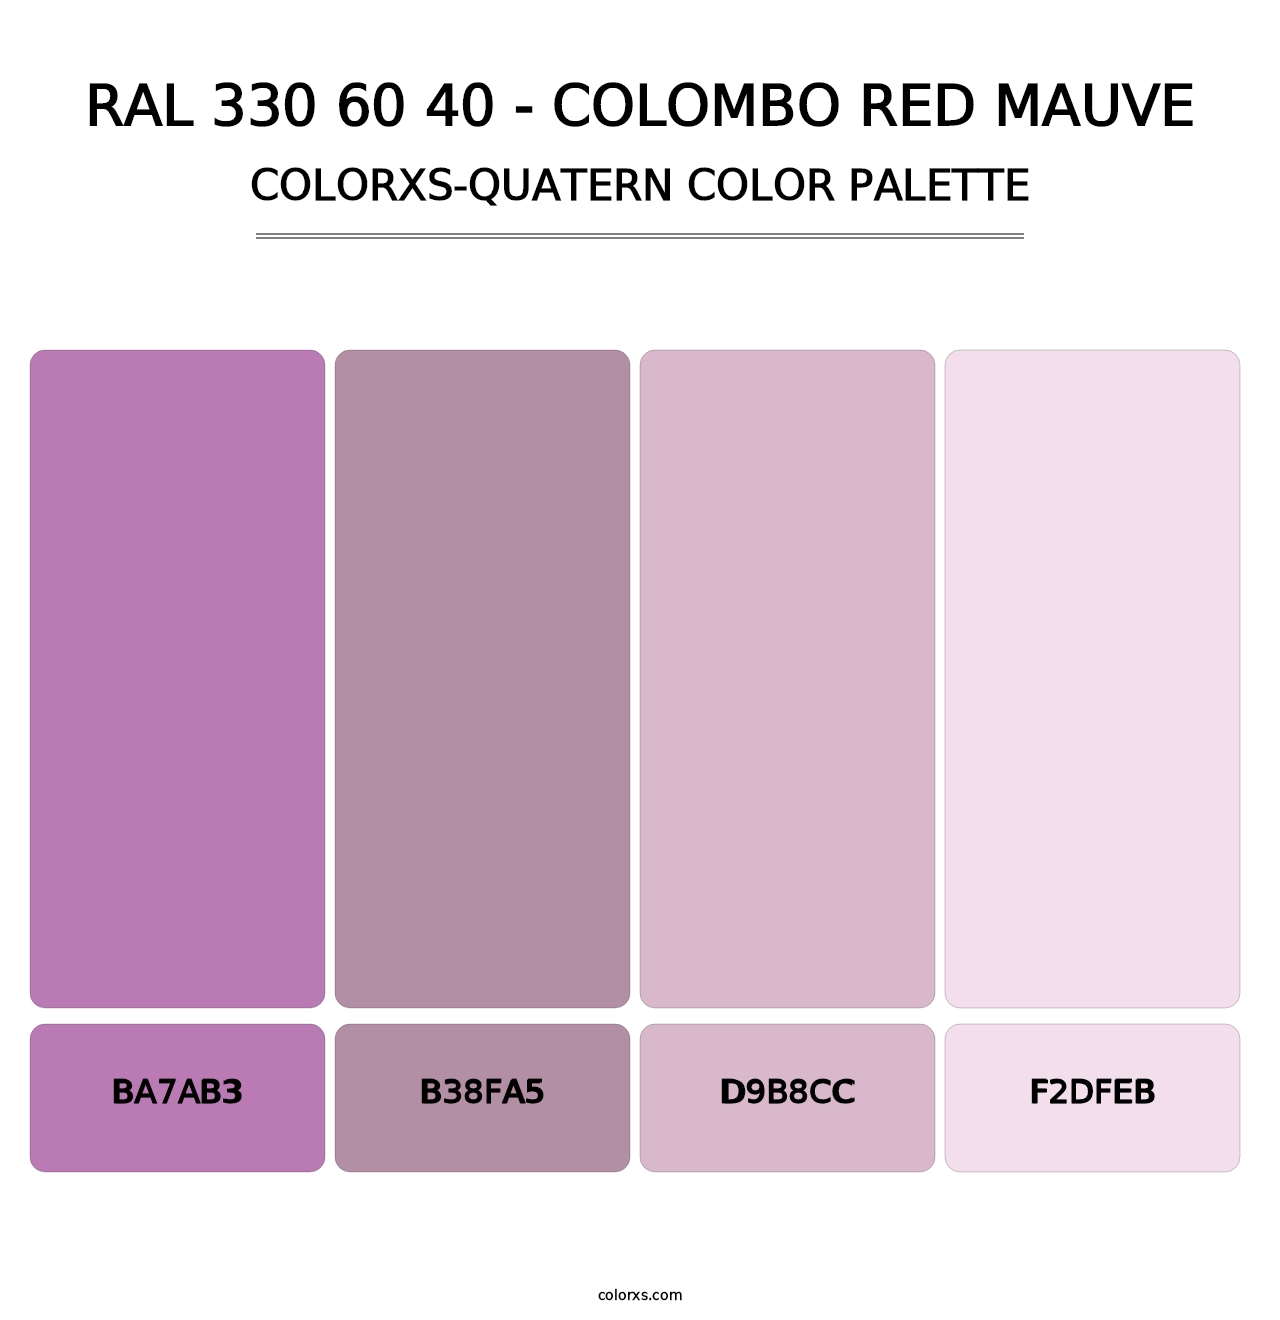 RAL 330 60 40 - Colombo Red Mauve - Colorxs Quatern Palette